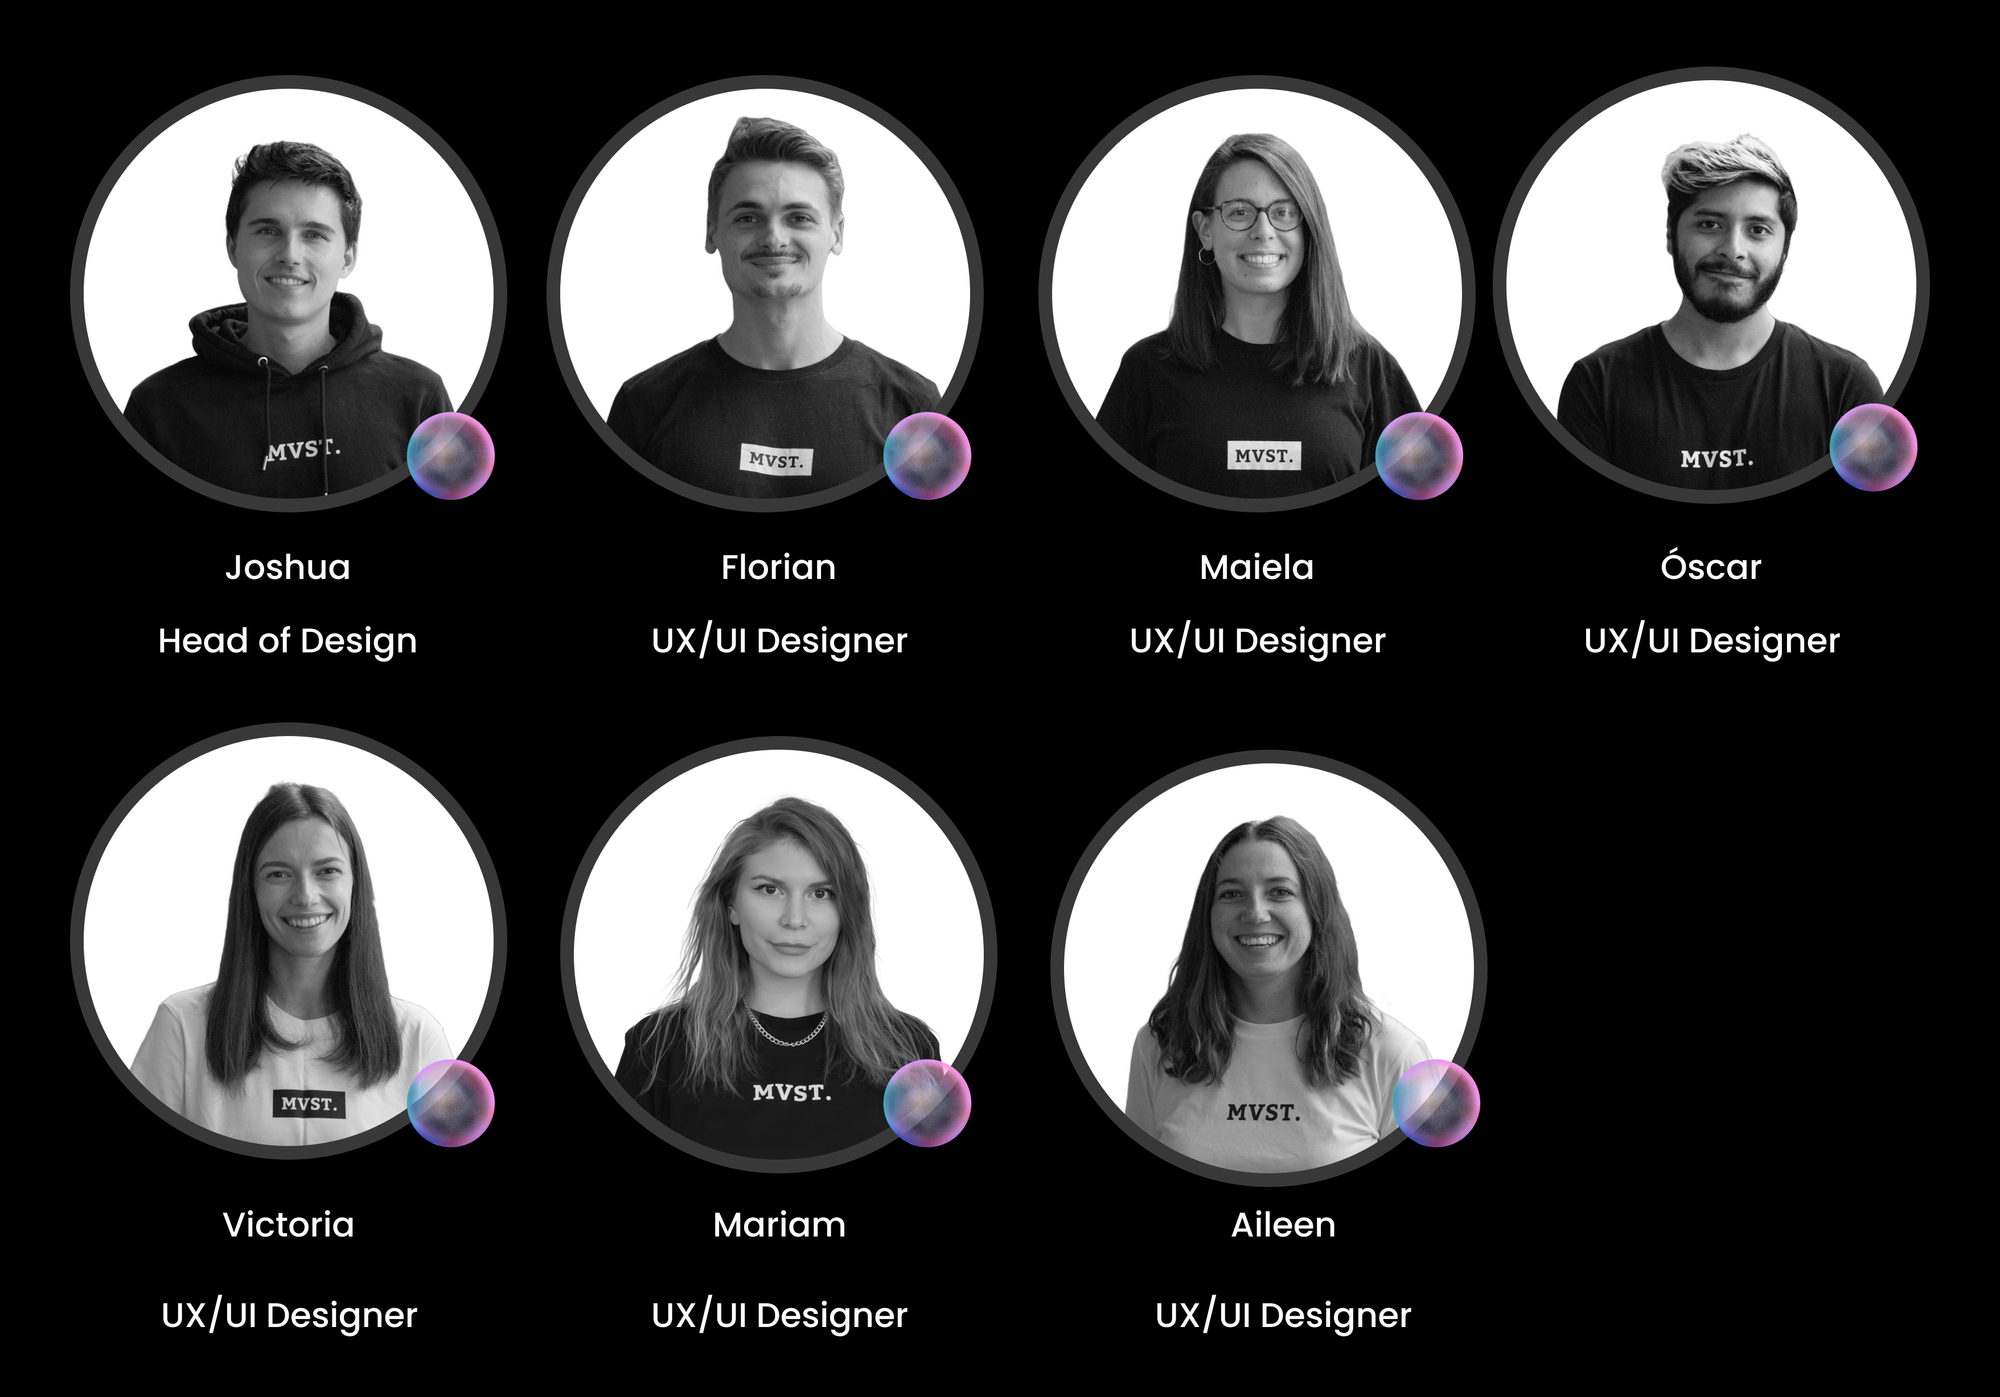 Photos, Names, and Roles of the Product Designers Team at MVST